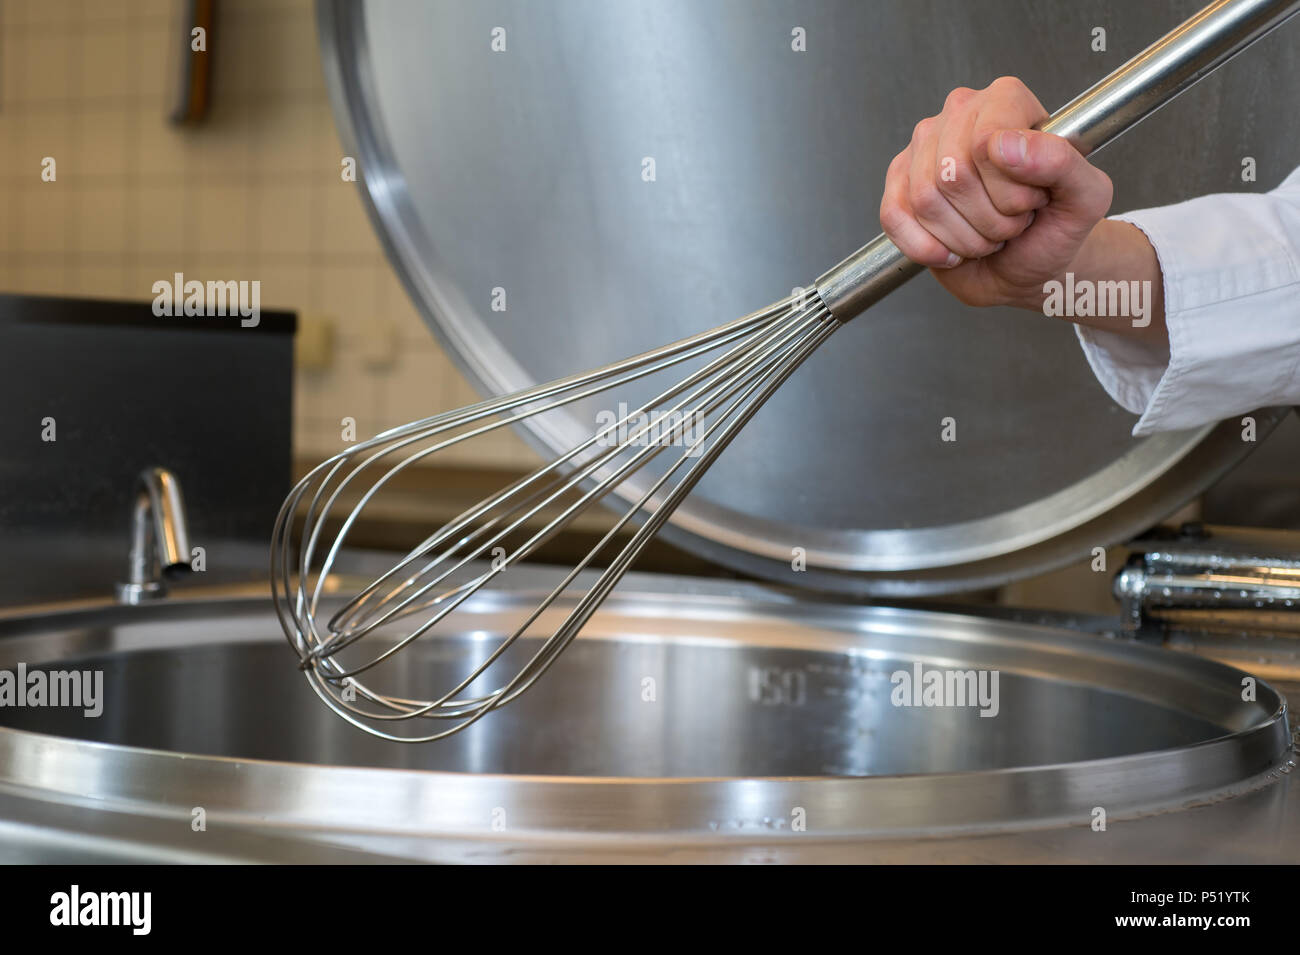 Whisk in a large kitchen Stock Photo - Alamy